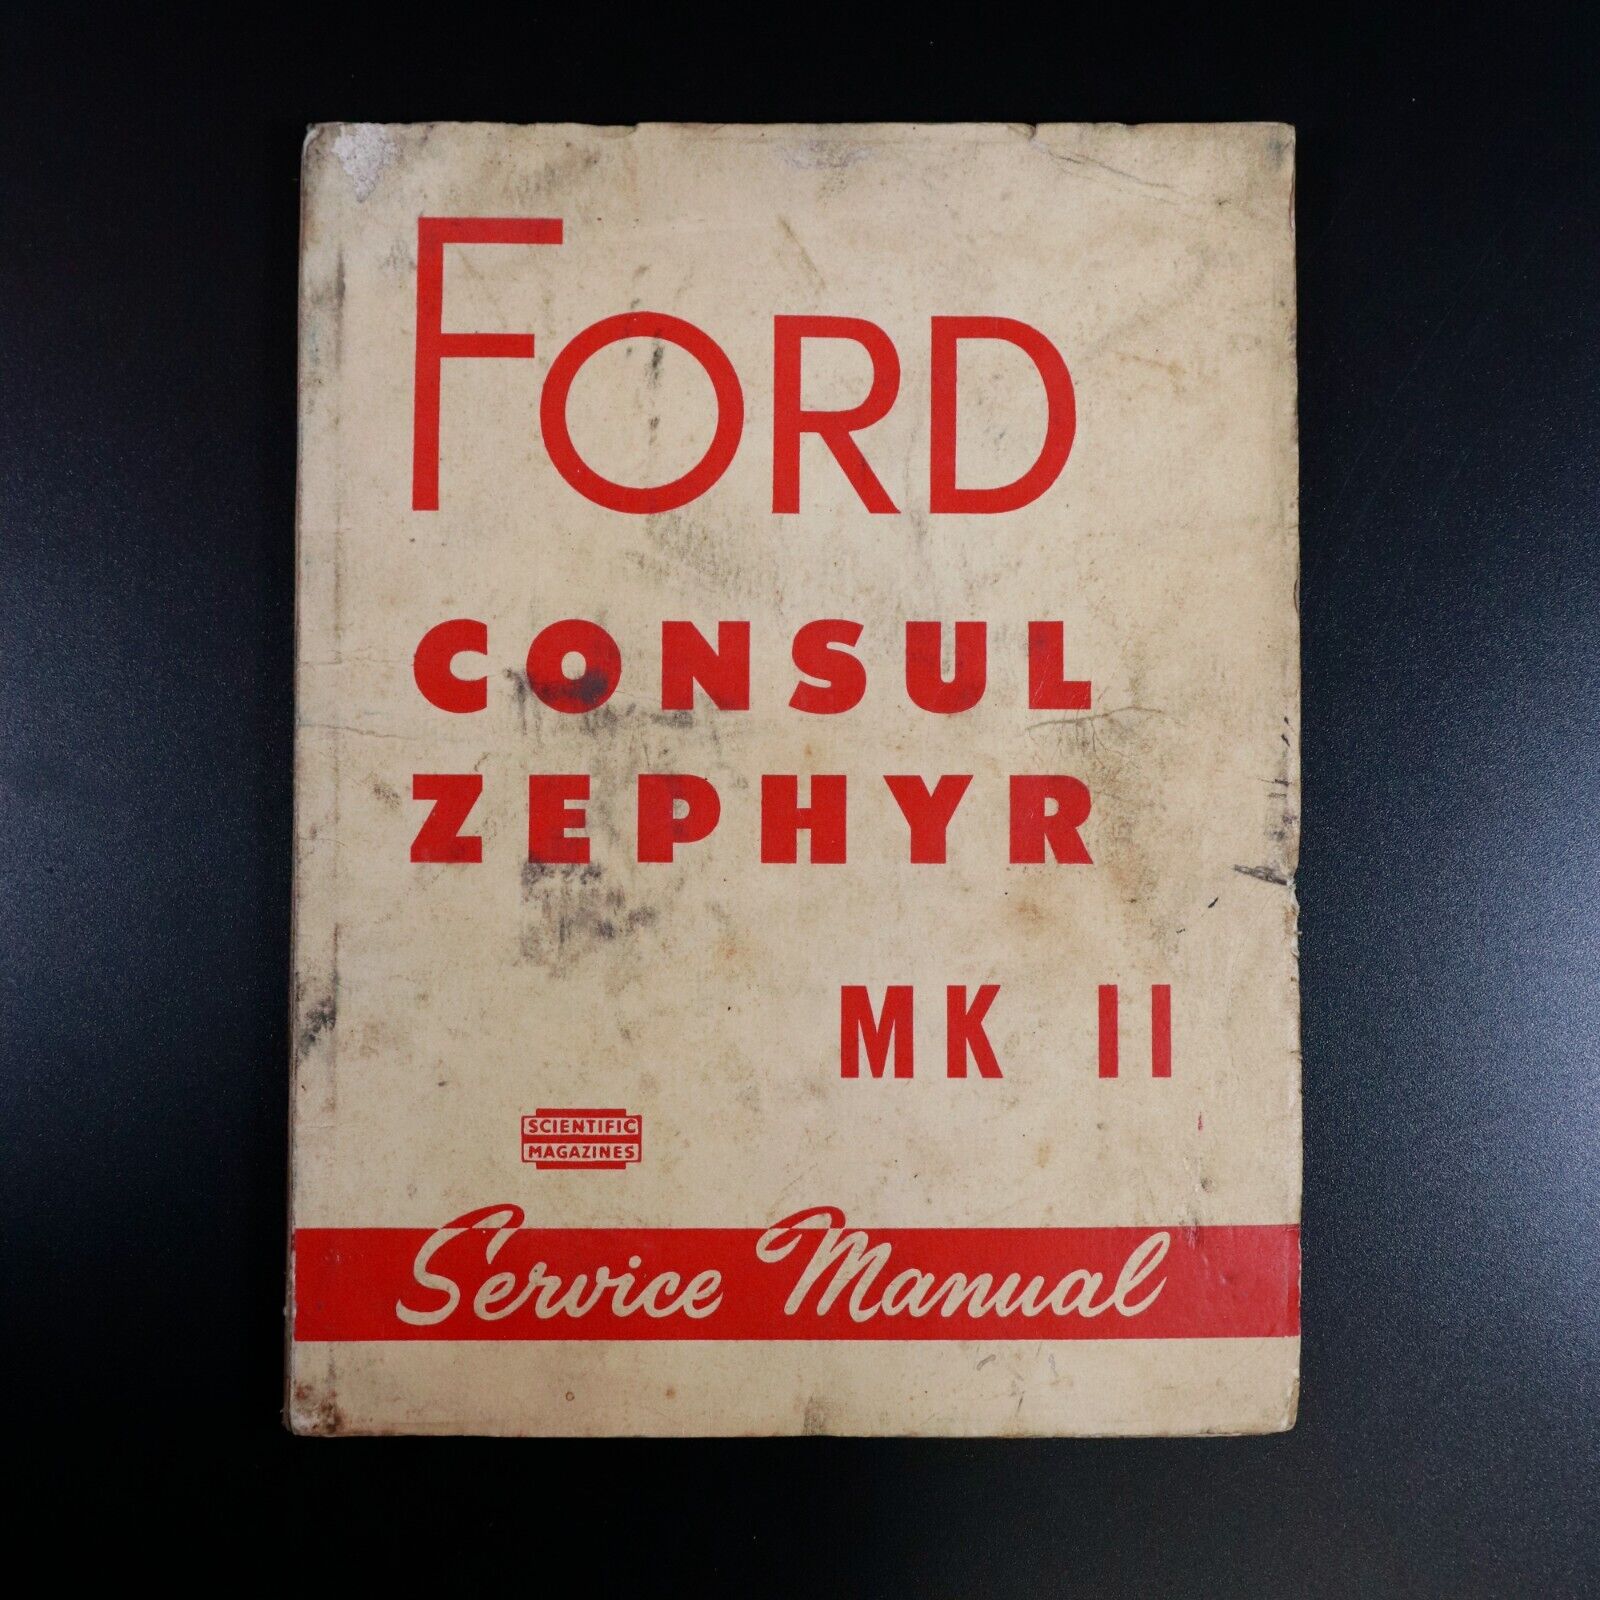 1958 Service Manual For Ford Consul Zephyr MK II 1956 Onwards Automotive Book